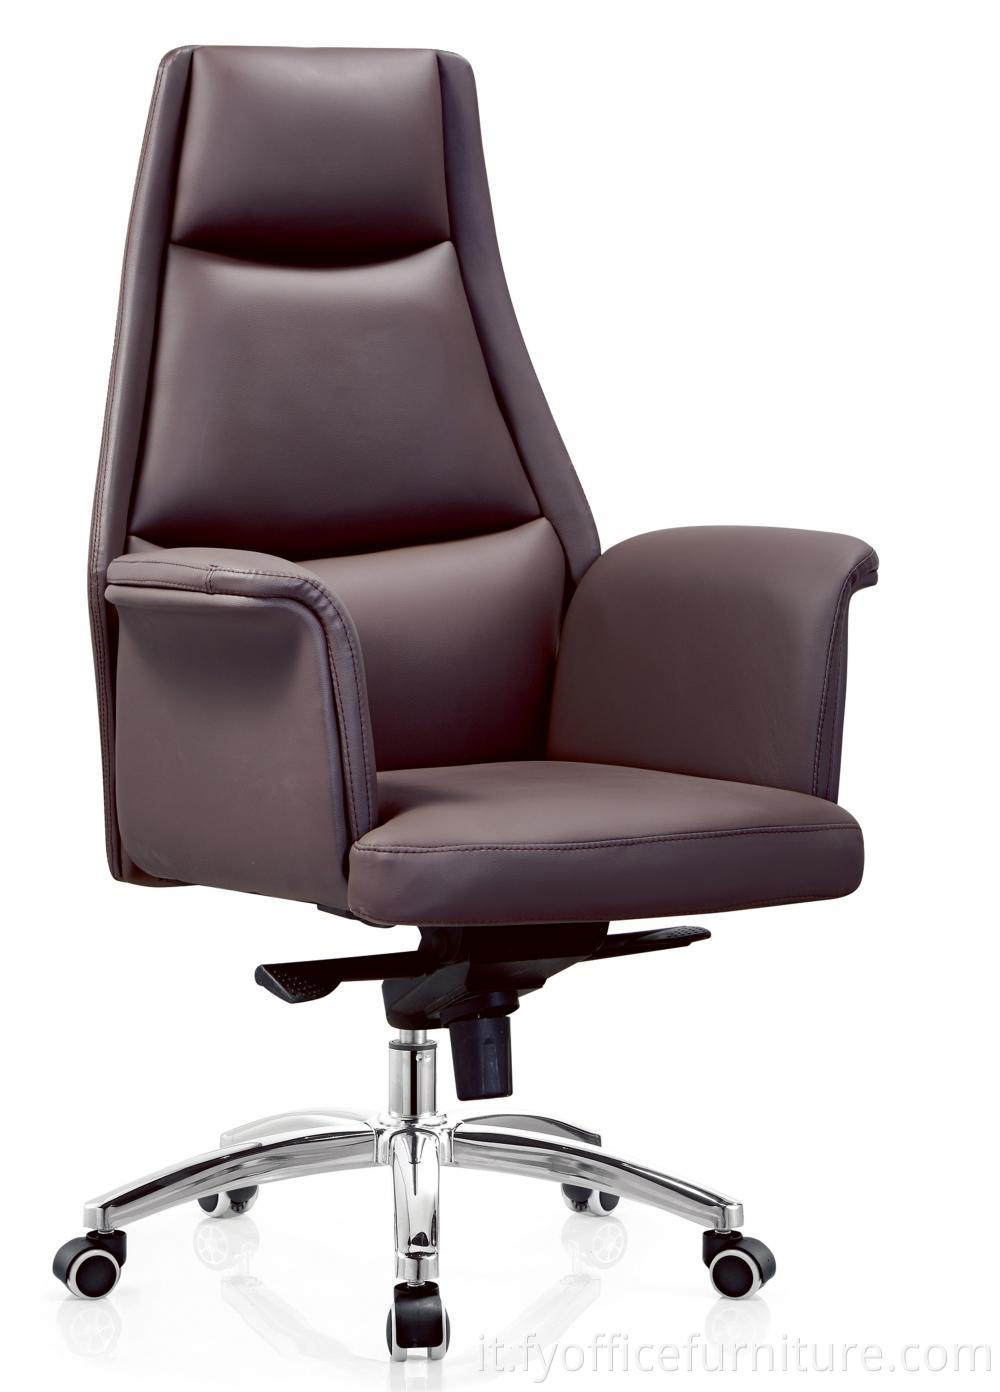 Synthetic Leather chair